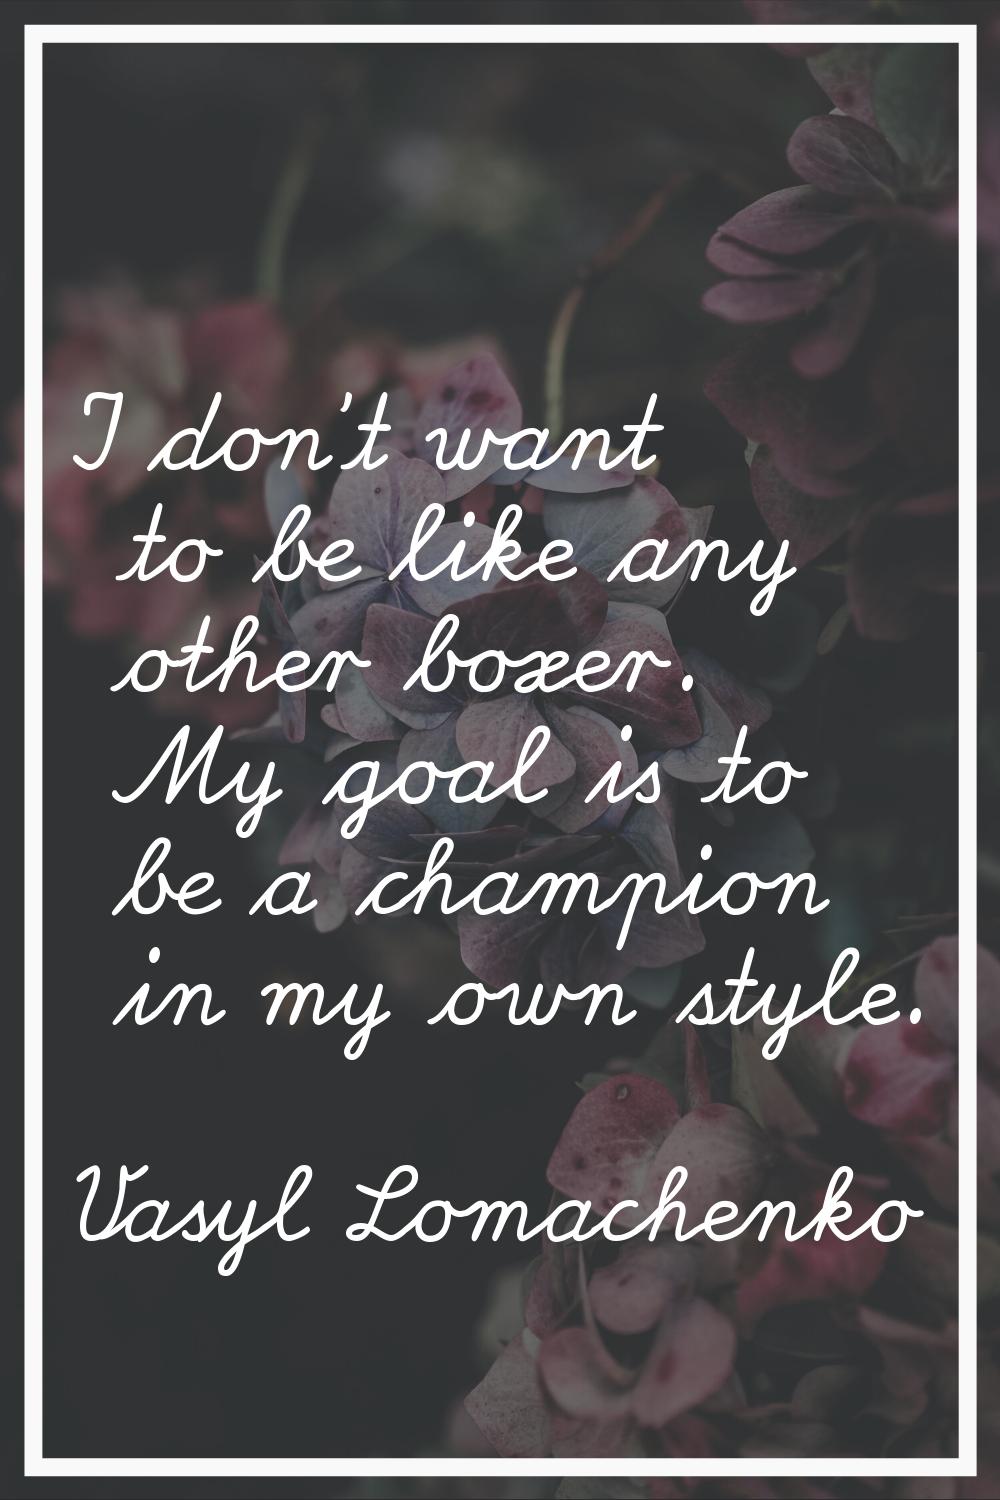 I don't want to be like any other boxer. My goal is to be a champion in my own style.